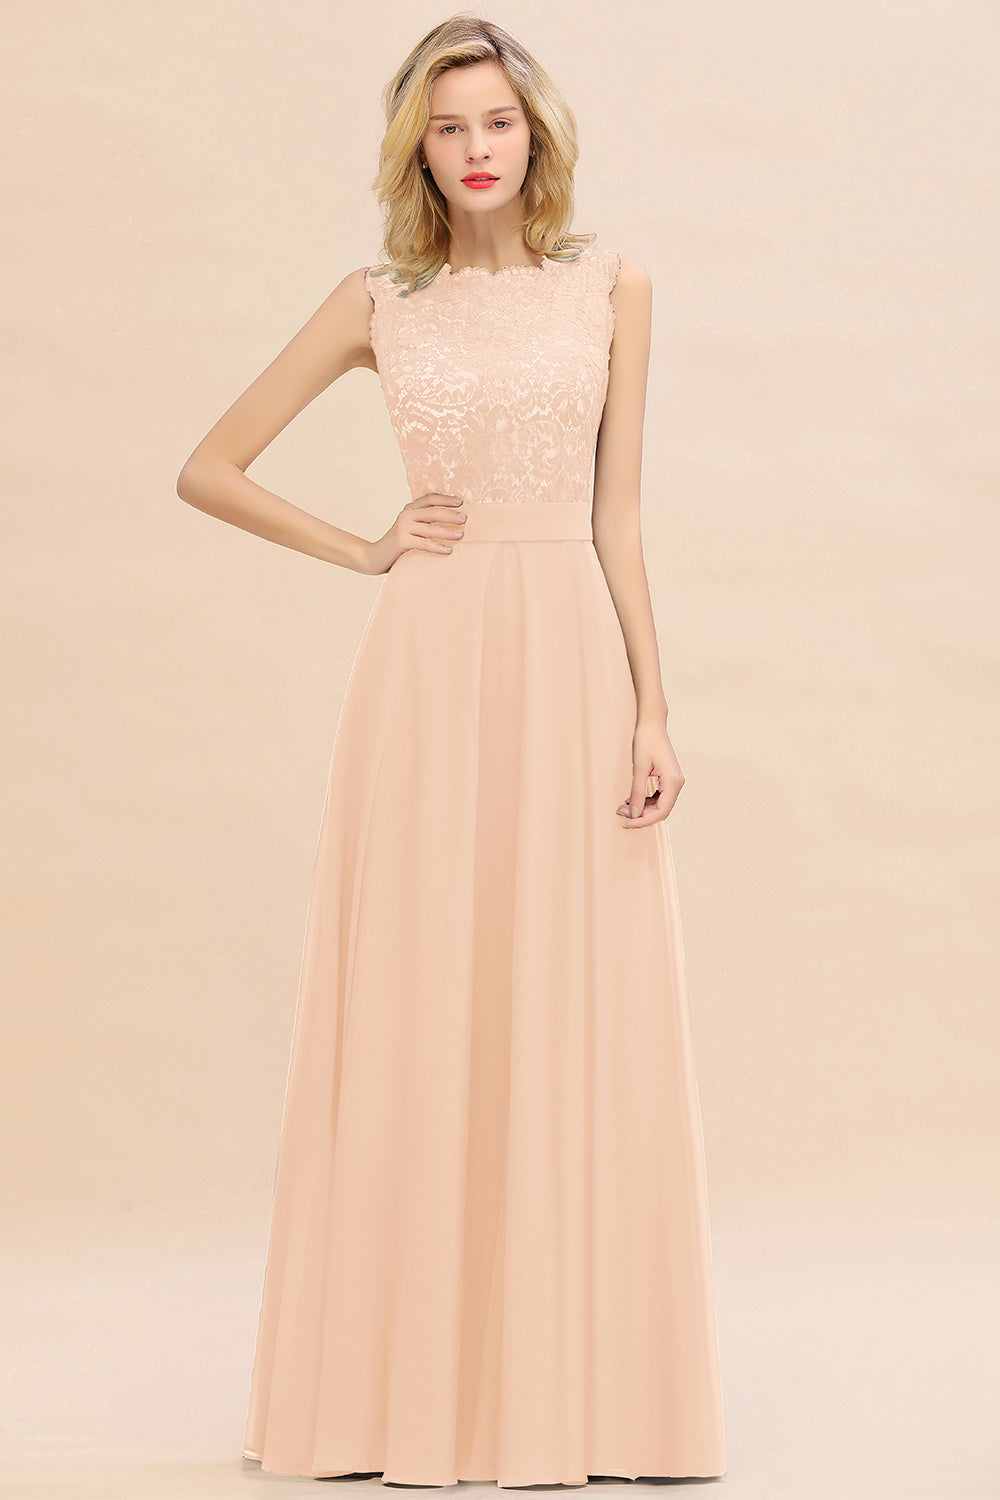 Exquisite Scoop Chiffon Lace Bridesmaid Dresses with V-Back